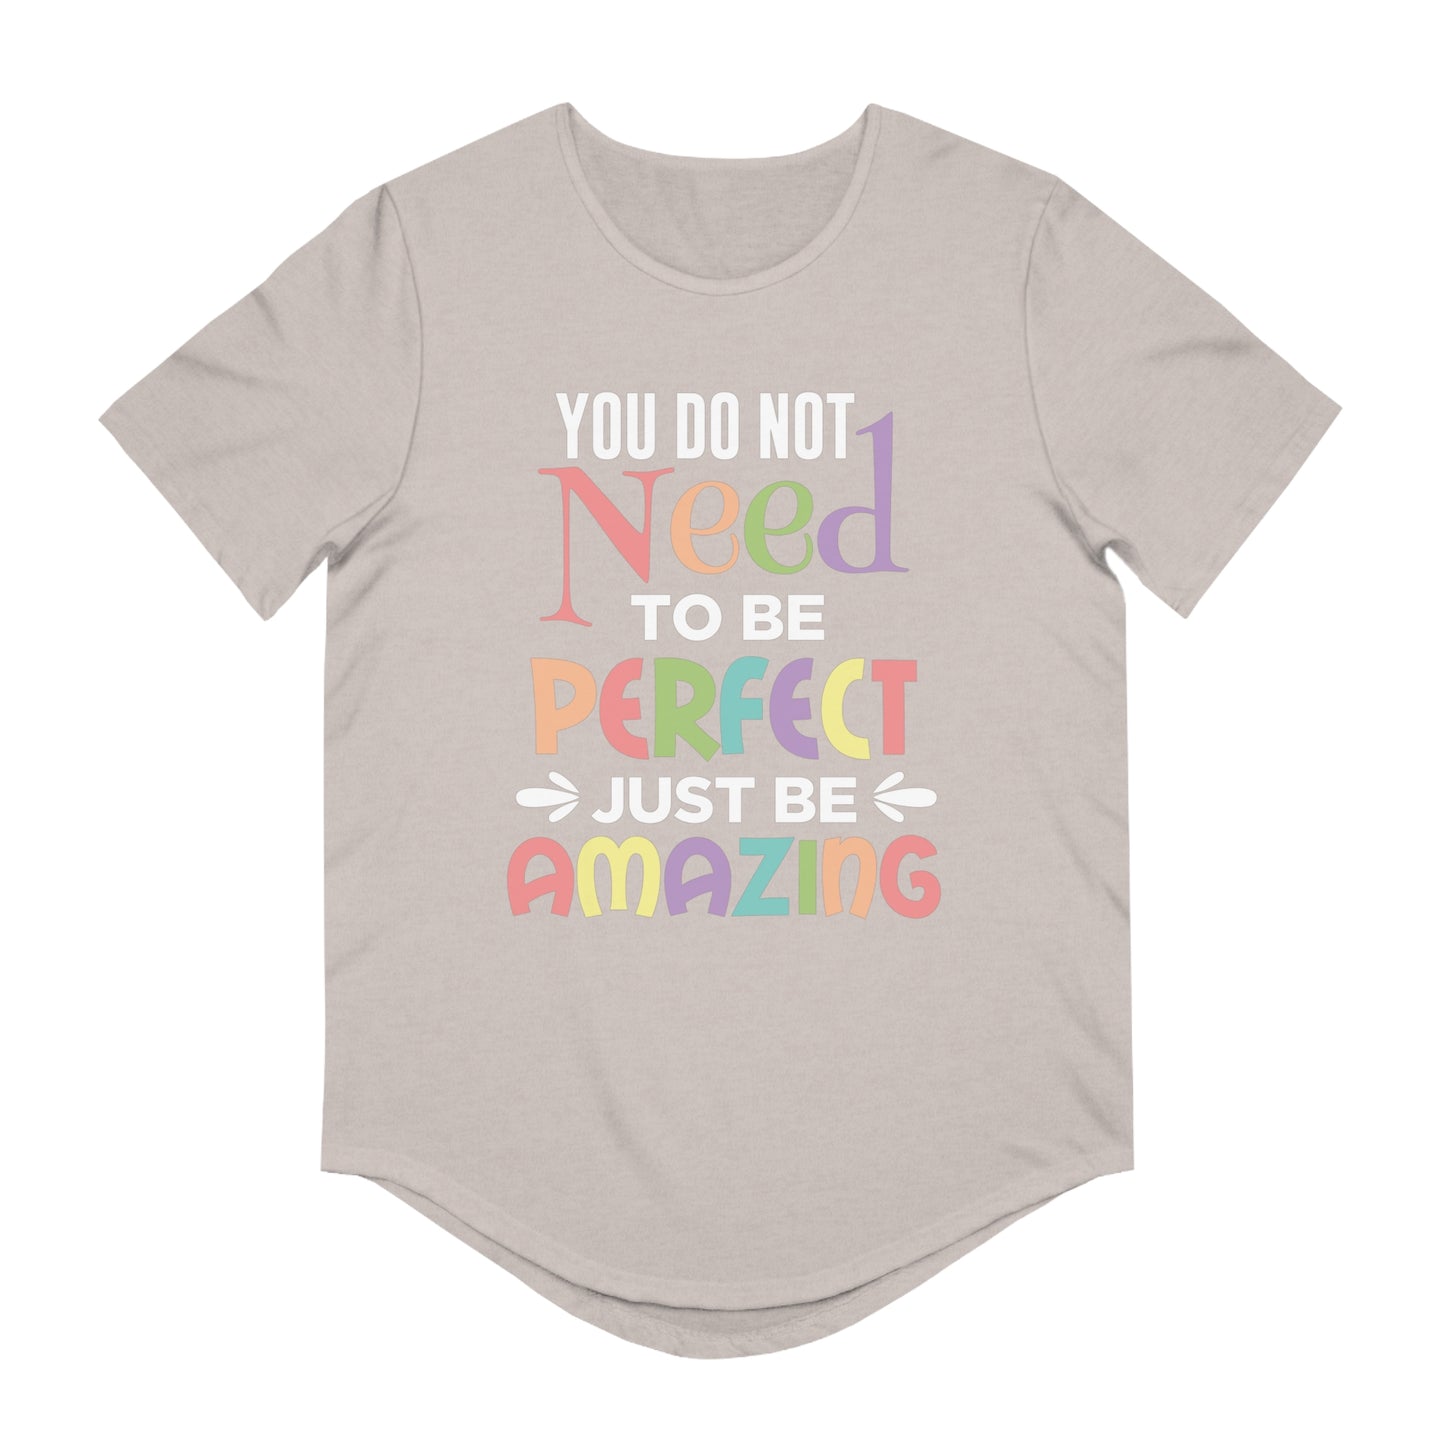 You Do Not Need To Be Perfect Just Be Amazing Men's Curved Tee, Amazing shirts, Inspirational shirts, Motivational Shirts, Positive shirts